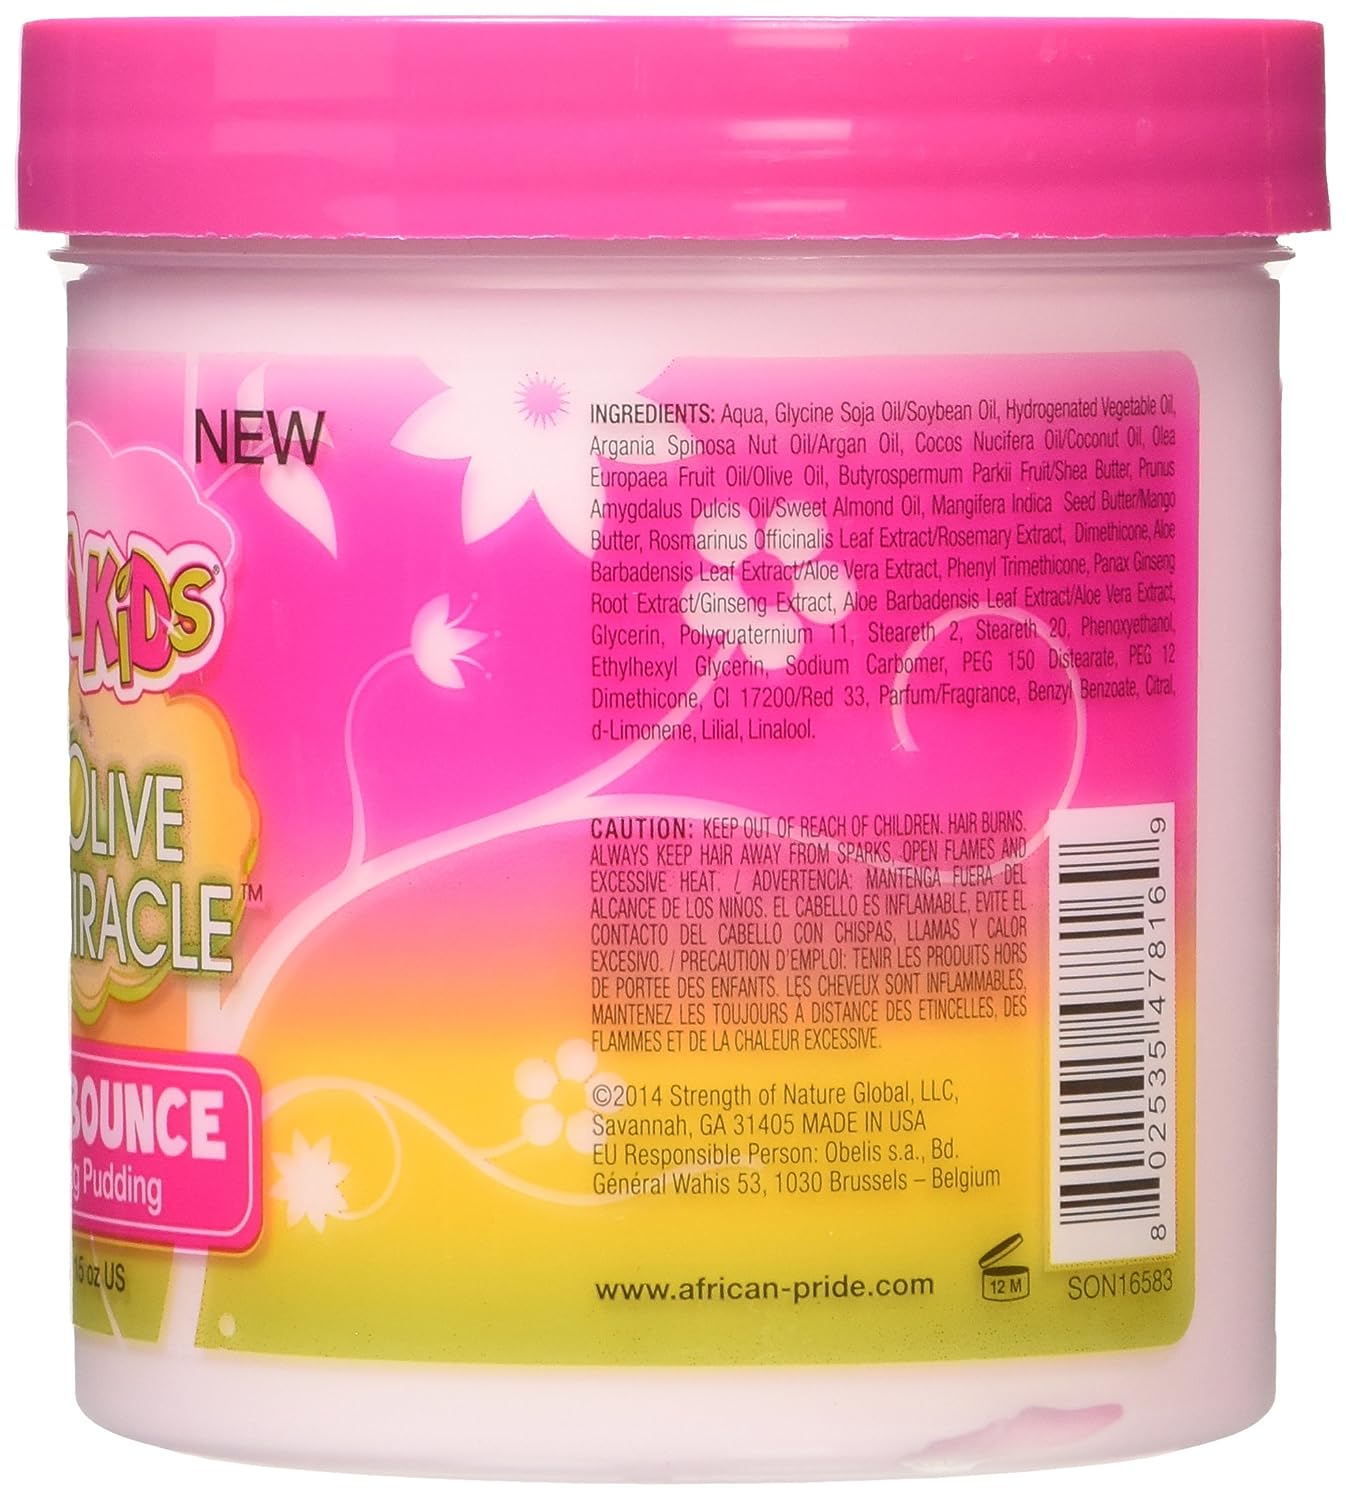 AFRICAN PRIDE Dream Kids Olive Miracle Quick Bounce Detangling Pudding 15oz